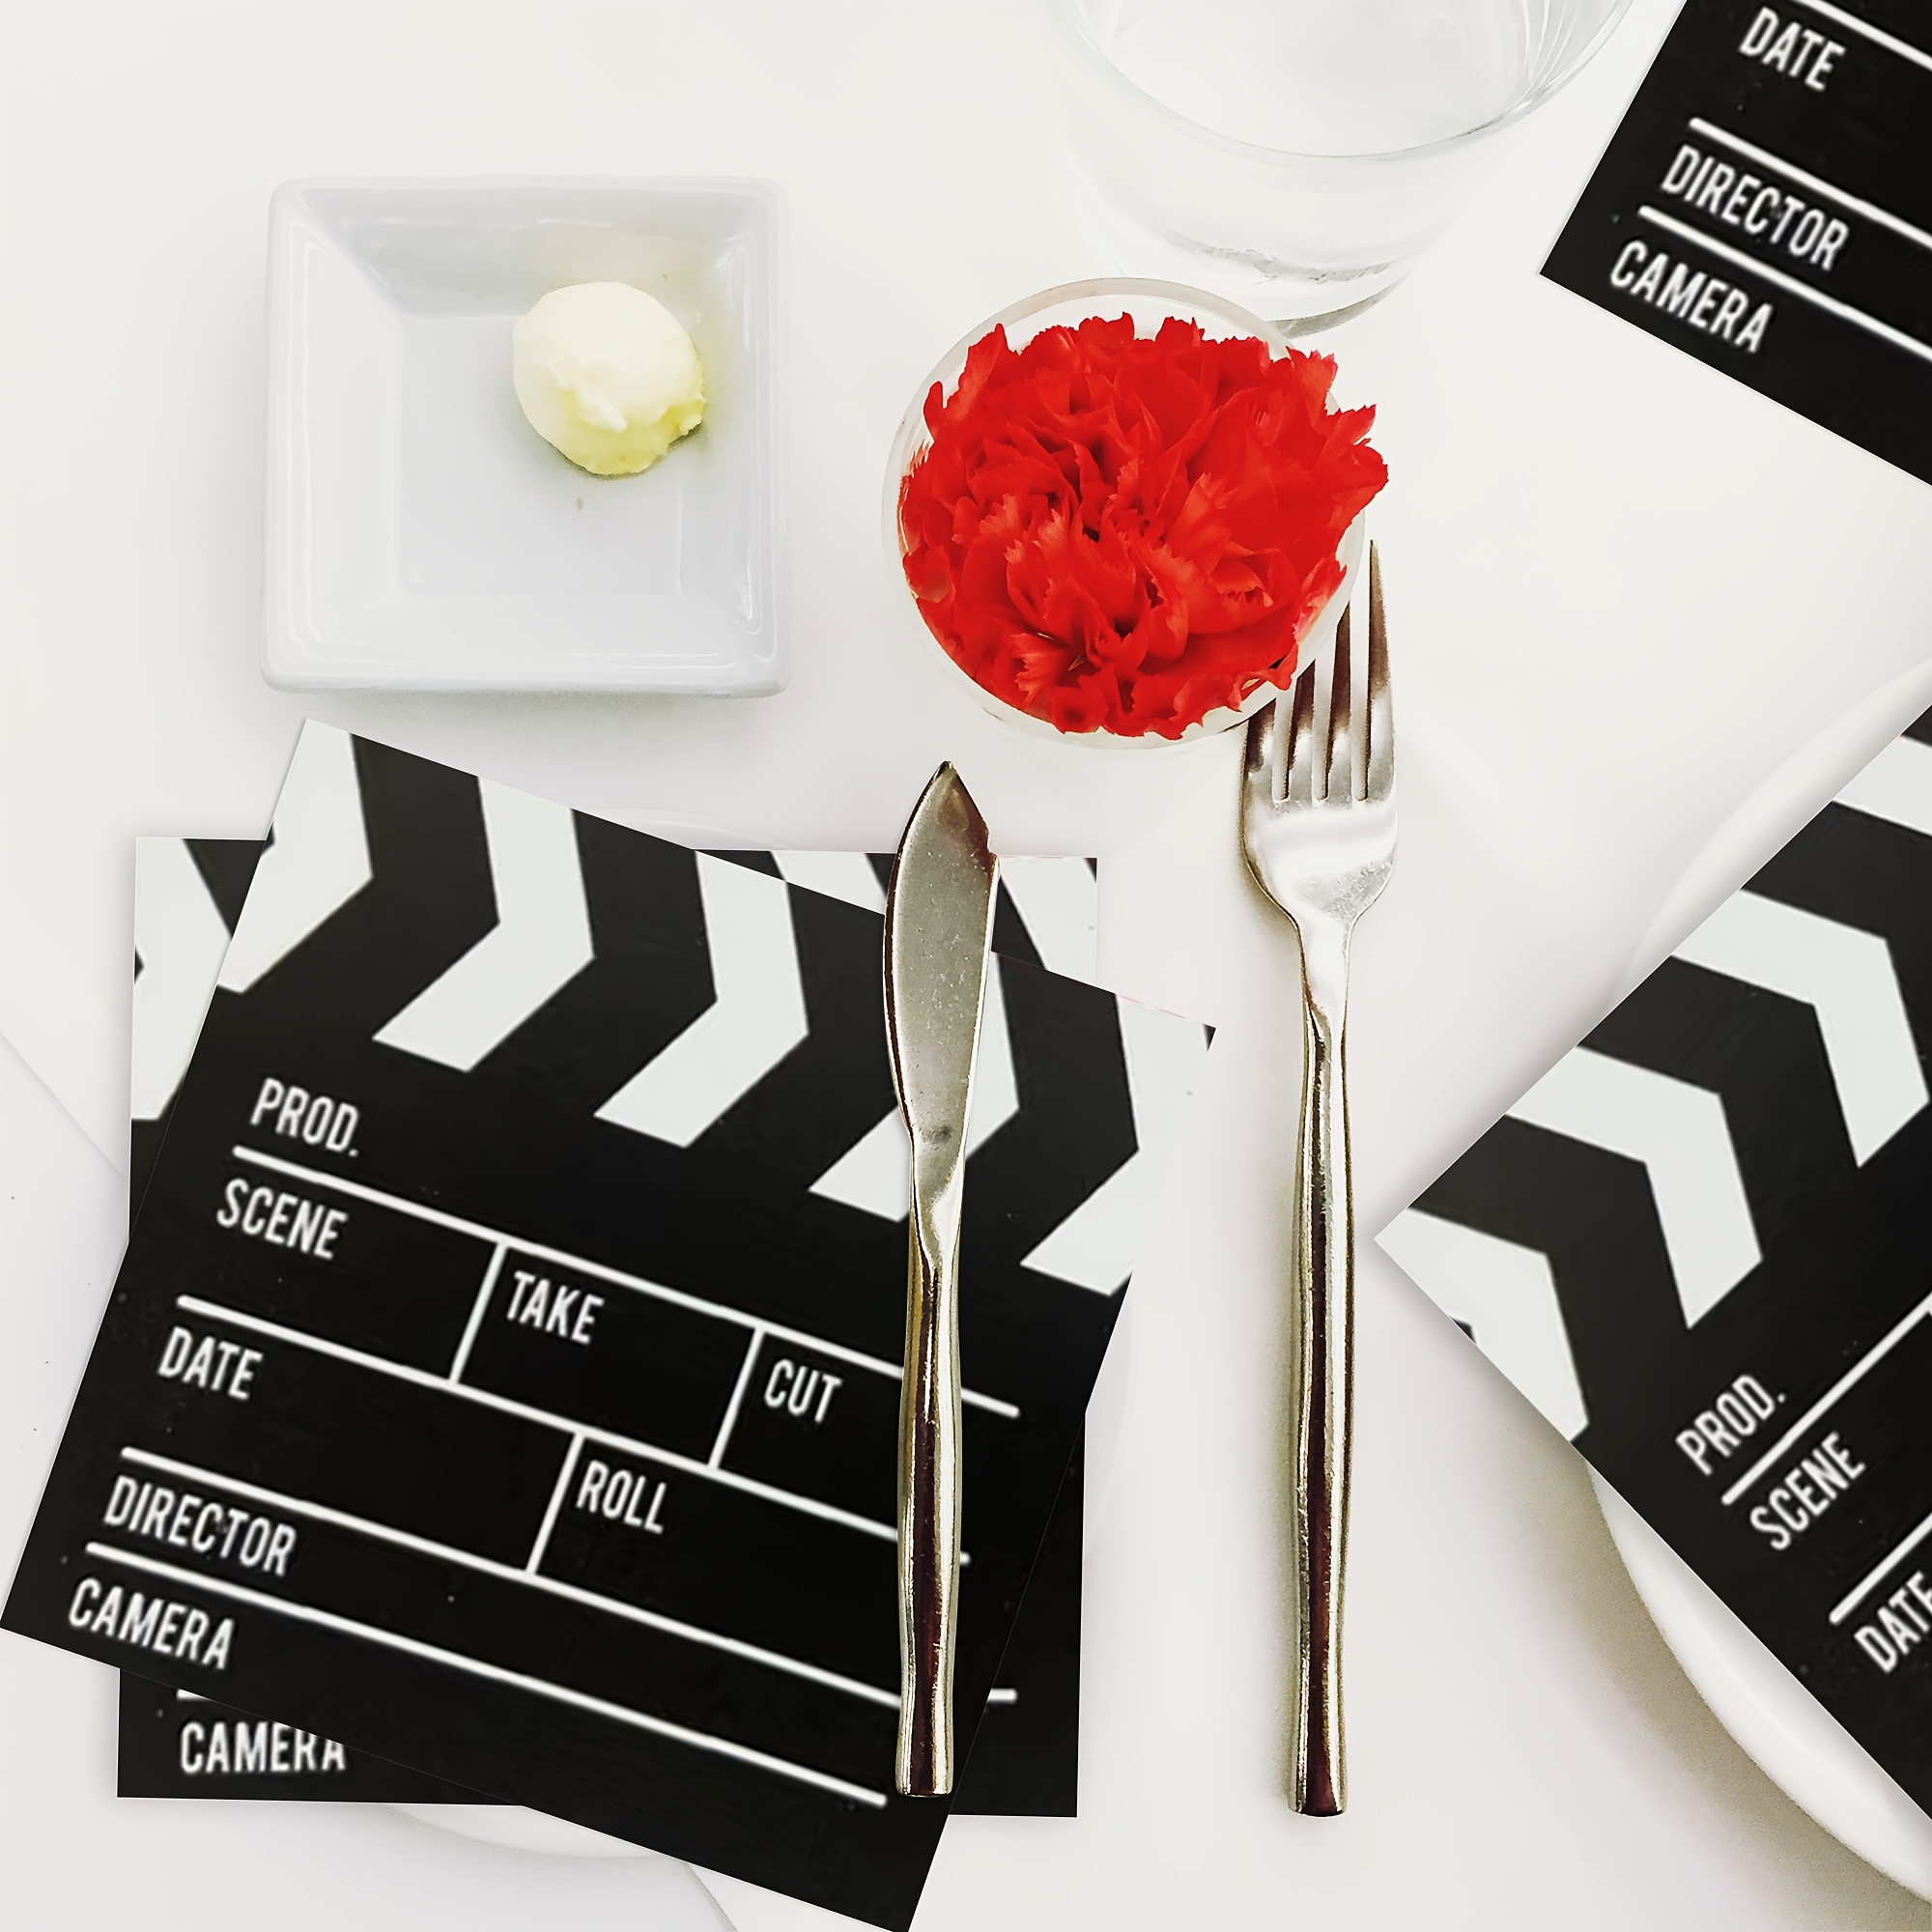 

Movie Night Themed Party Supplies - 20 Pack Disposable 2-ply Paper Napkins For Birthday, Red Carpet Events, Theater Parties - Classic Film Clapperboard Design